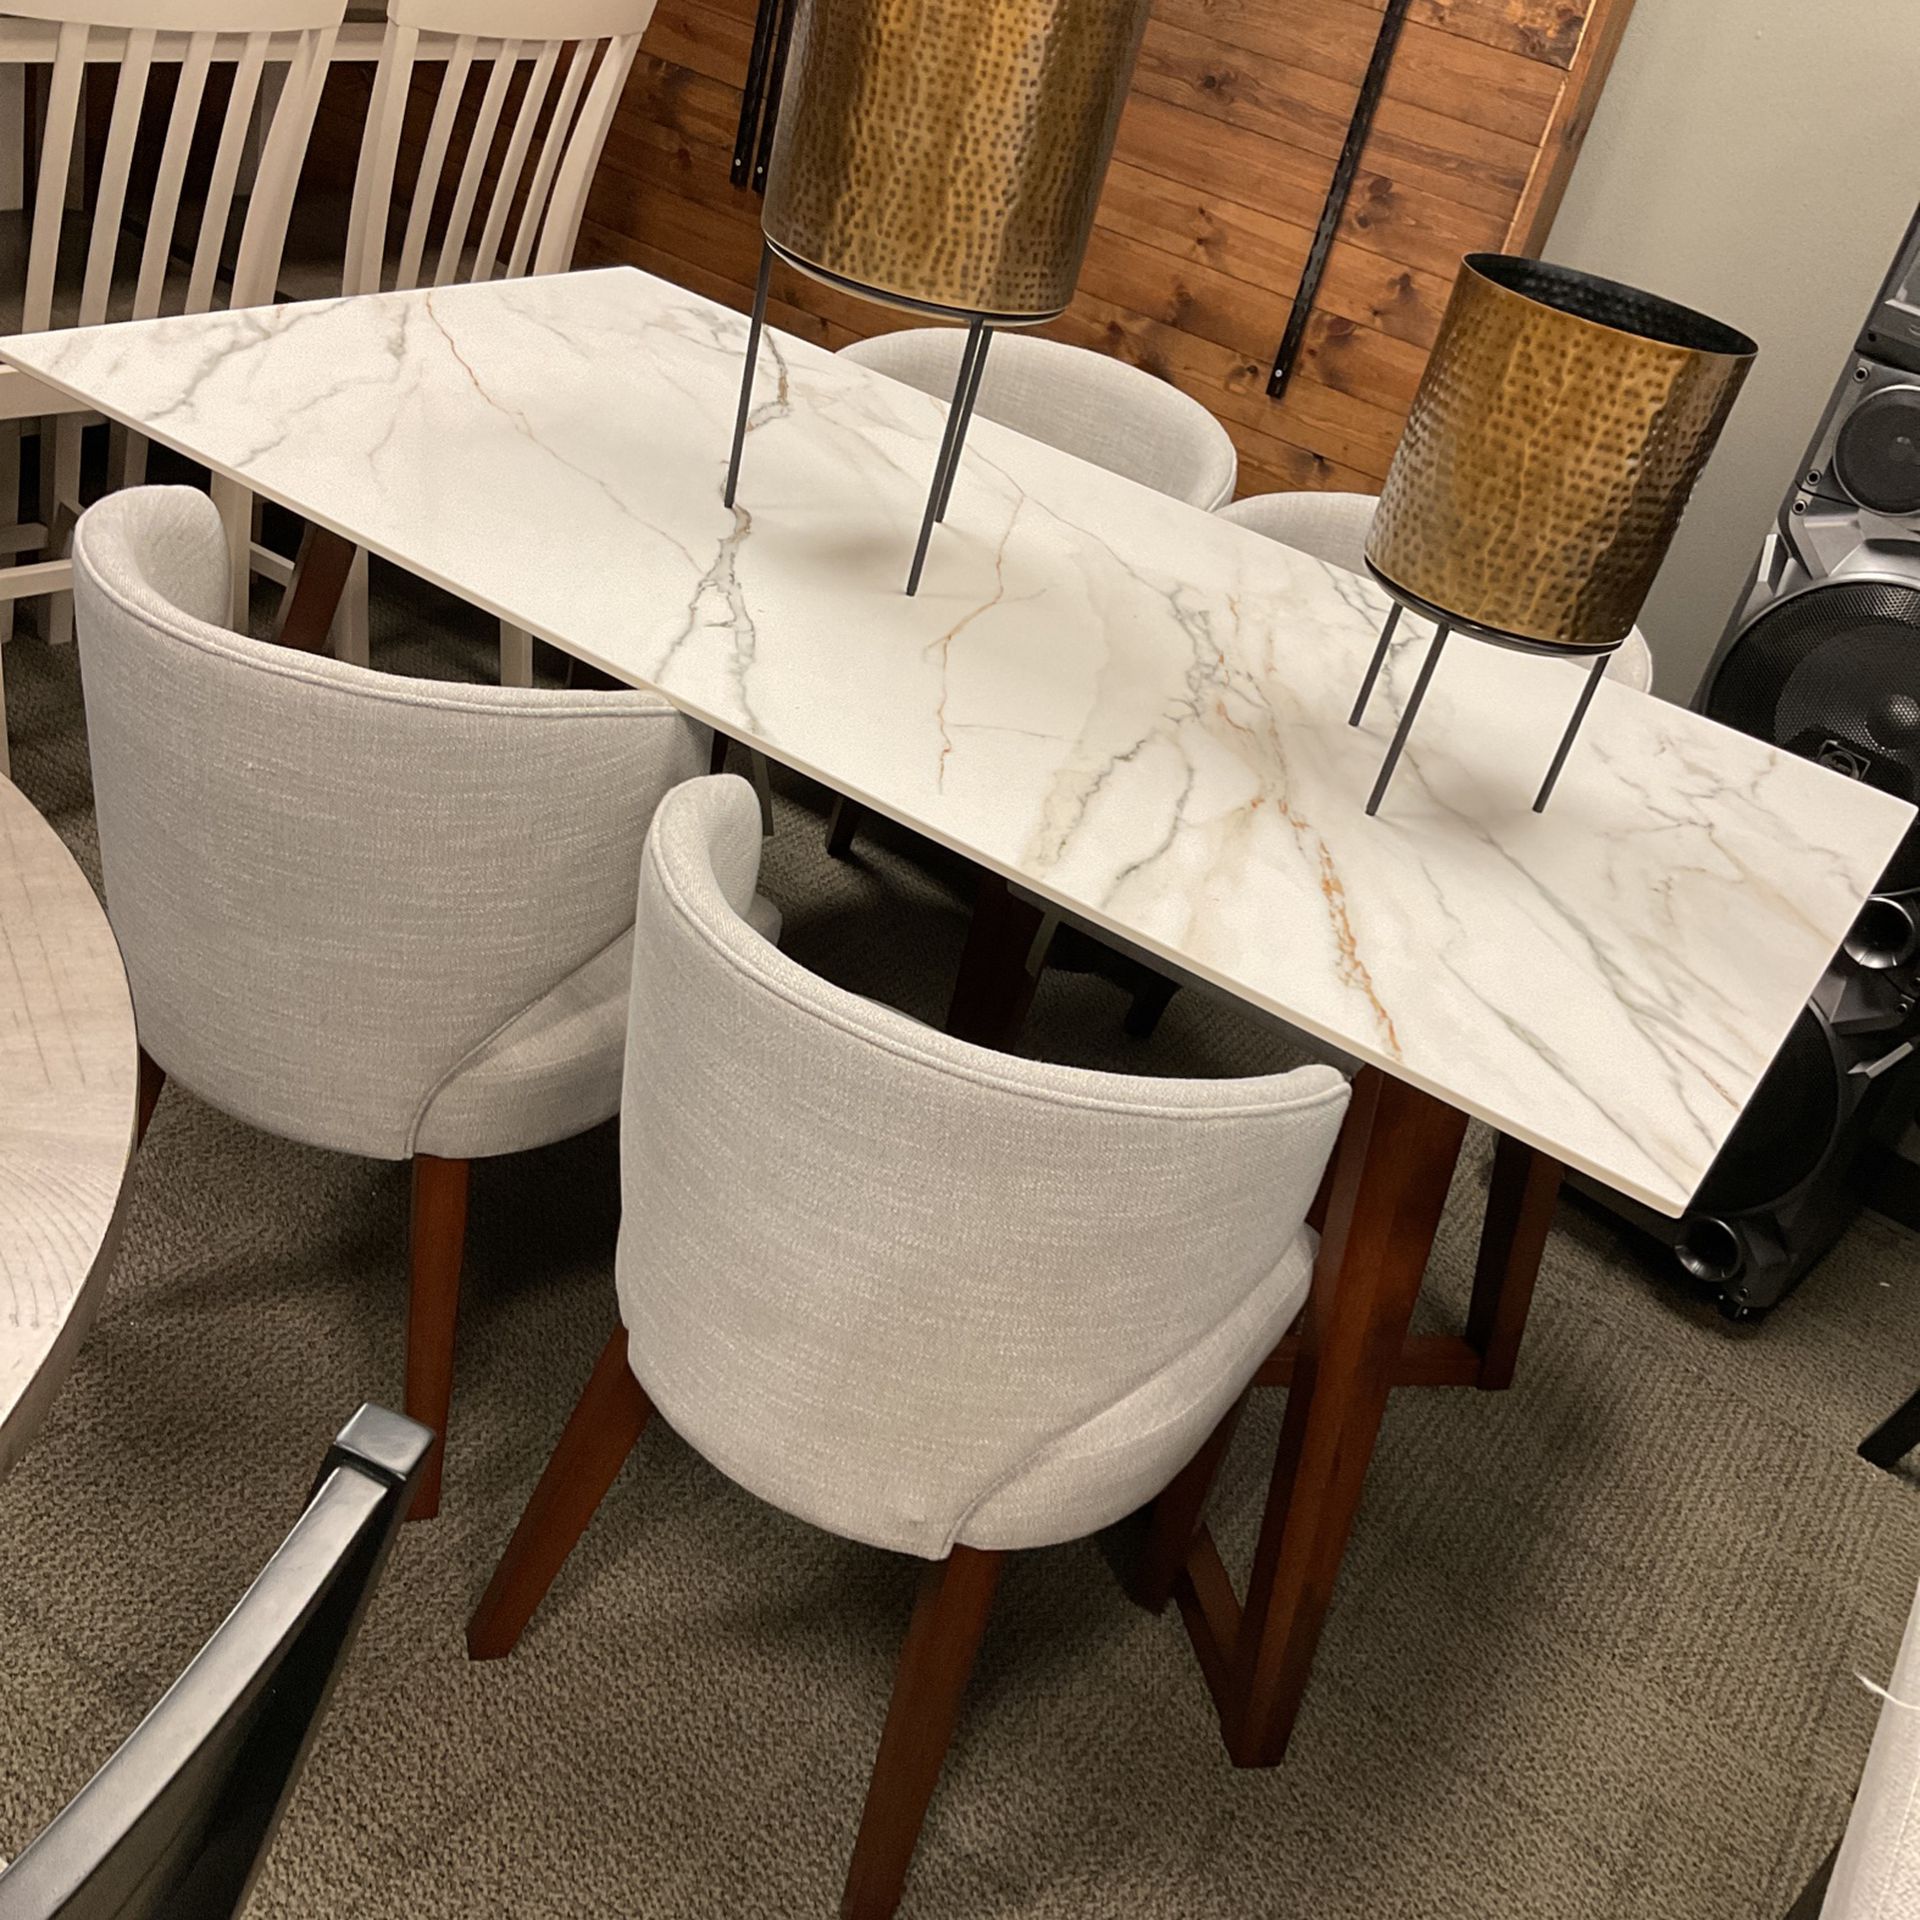 Modern Porcelain Dining Set 6 Chairs !!